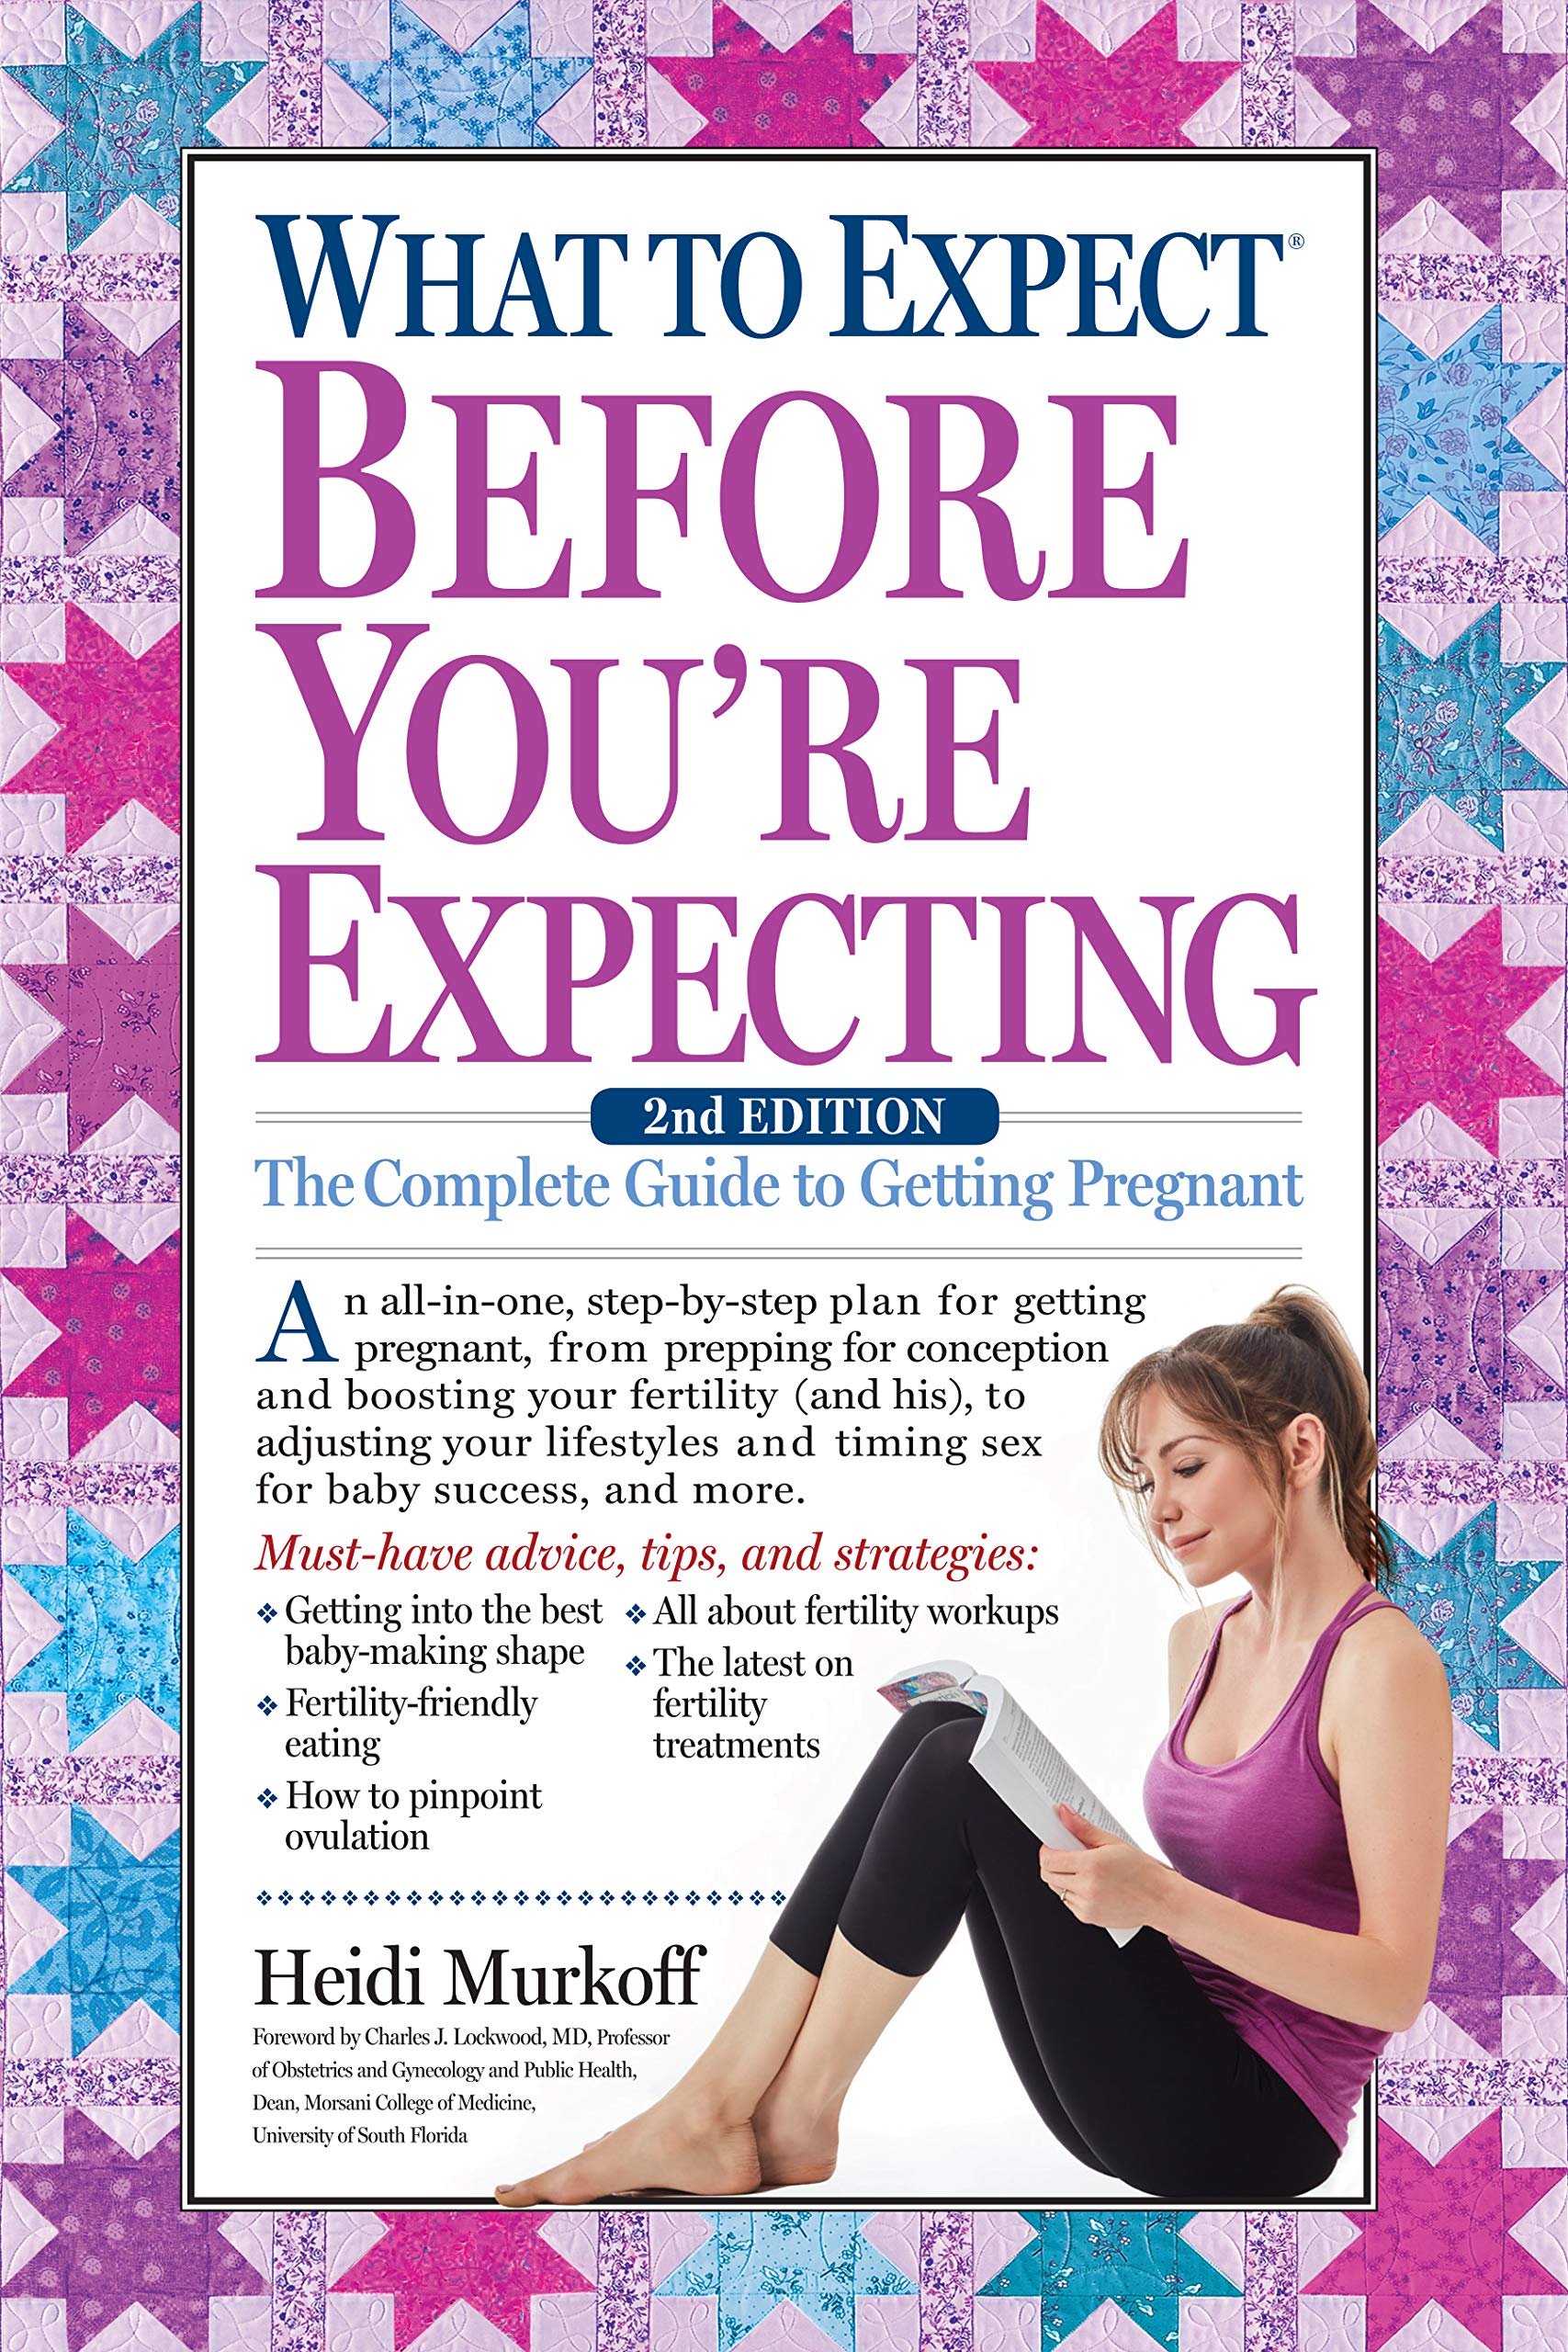 What To Expect Before You’re Expecting: The Complete Guide To Getting Pregnant